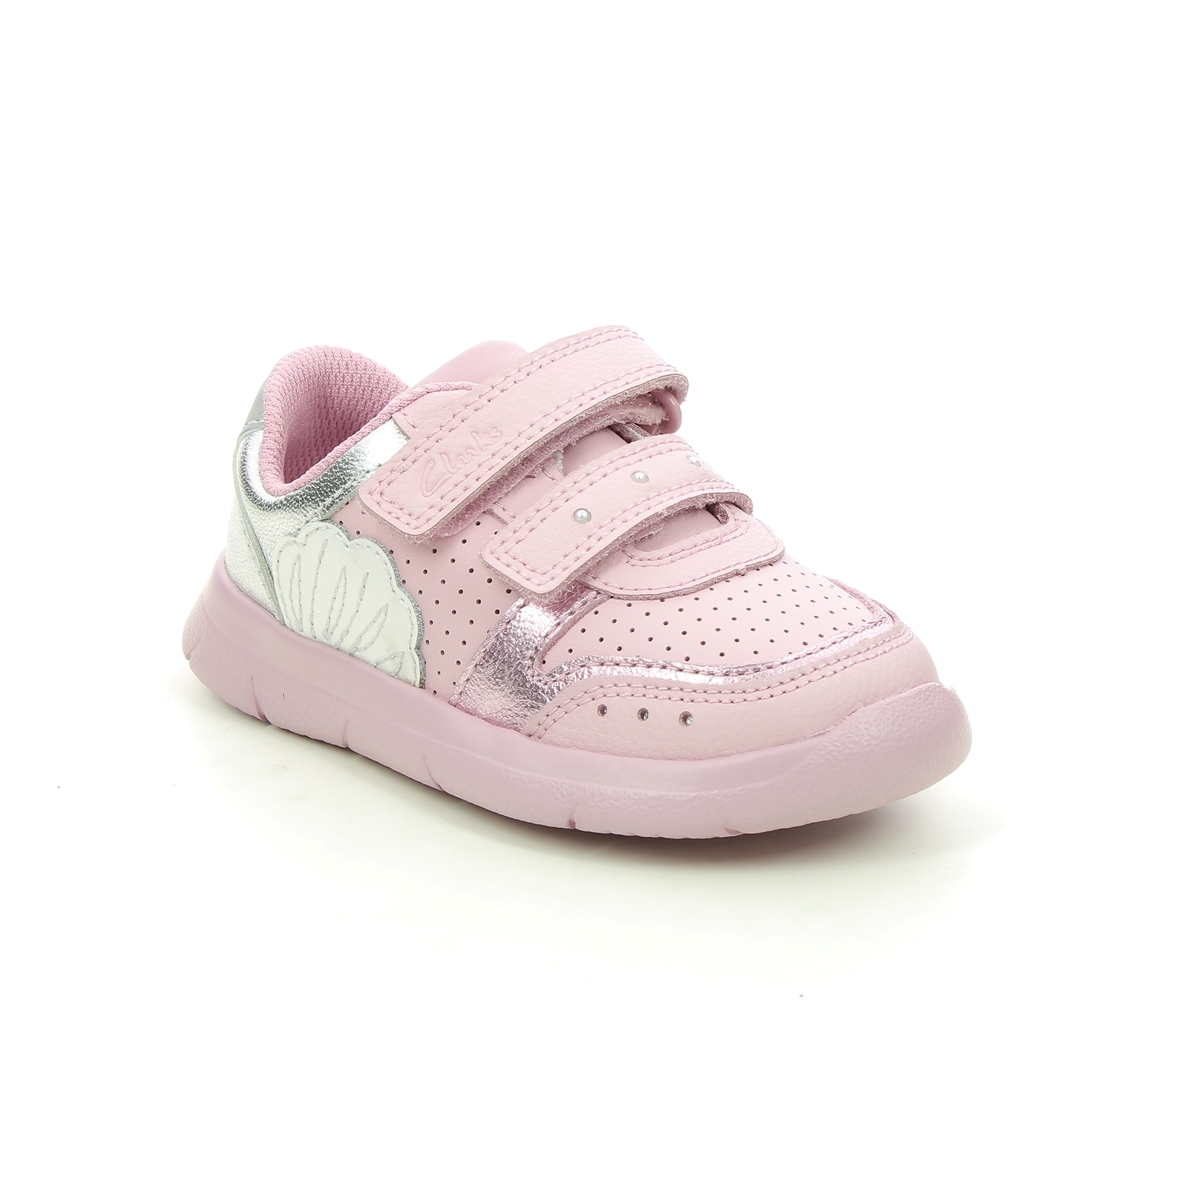 Clarks Ath Shell T Pink Leather Kids Toddler Girls Trainers 588097G In Size 4 In Plain Pink Leather G Width Fitting For kids